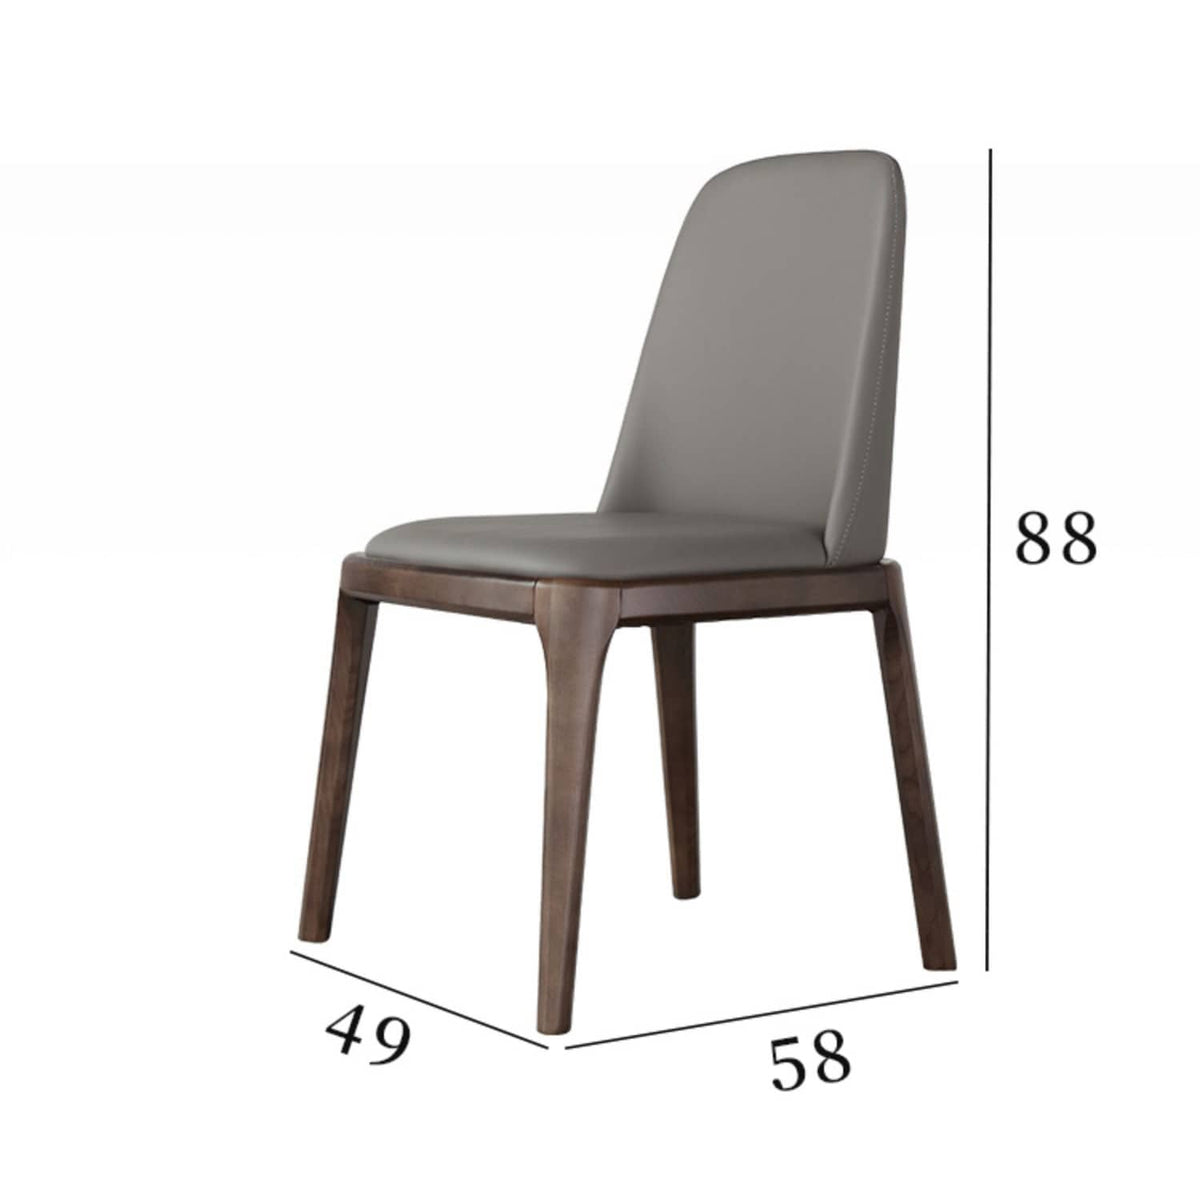 Elegant Dark Gray Ash Wood Chair with Scratch-Resistant Fabric - Durable & Stylish Seating hagst-338